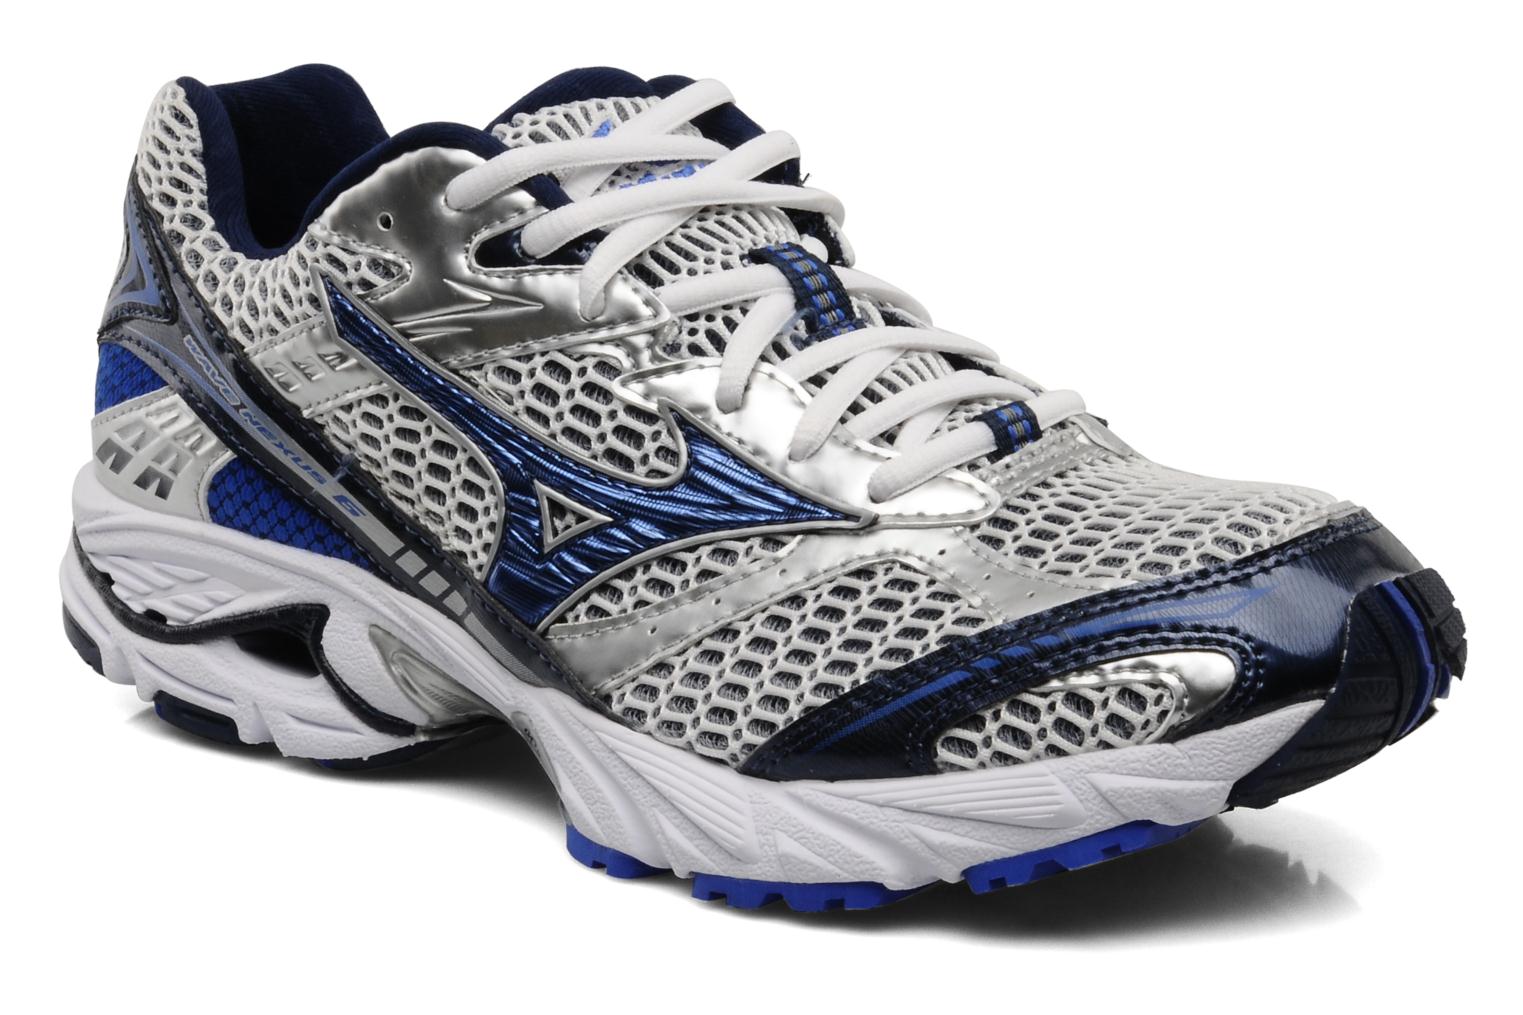 mizuno wave ovation 2 review,Limited Time Offer,aksharaconsultancy.com